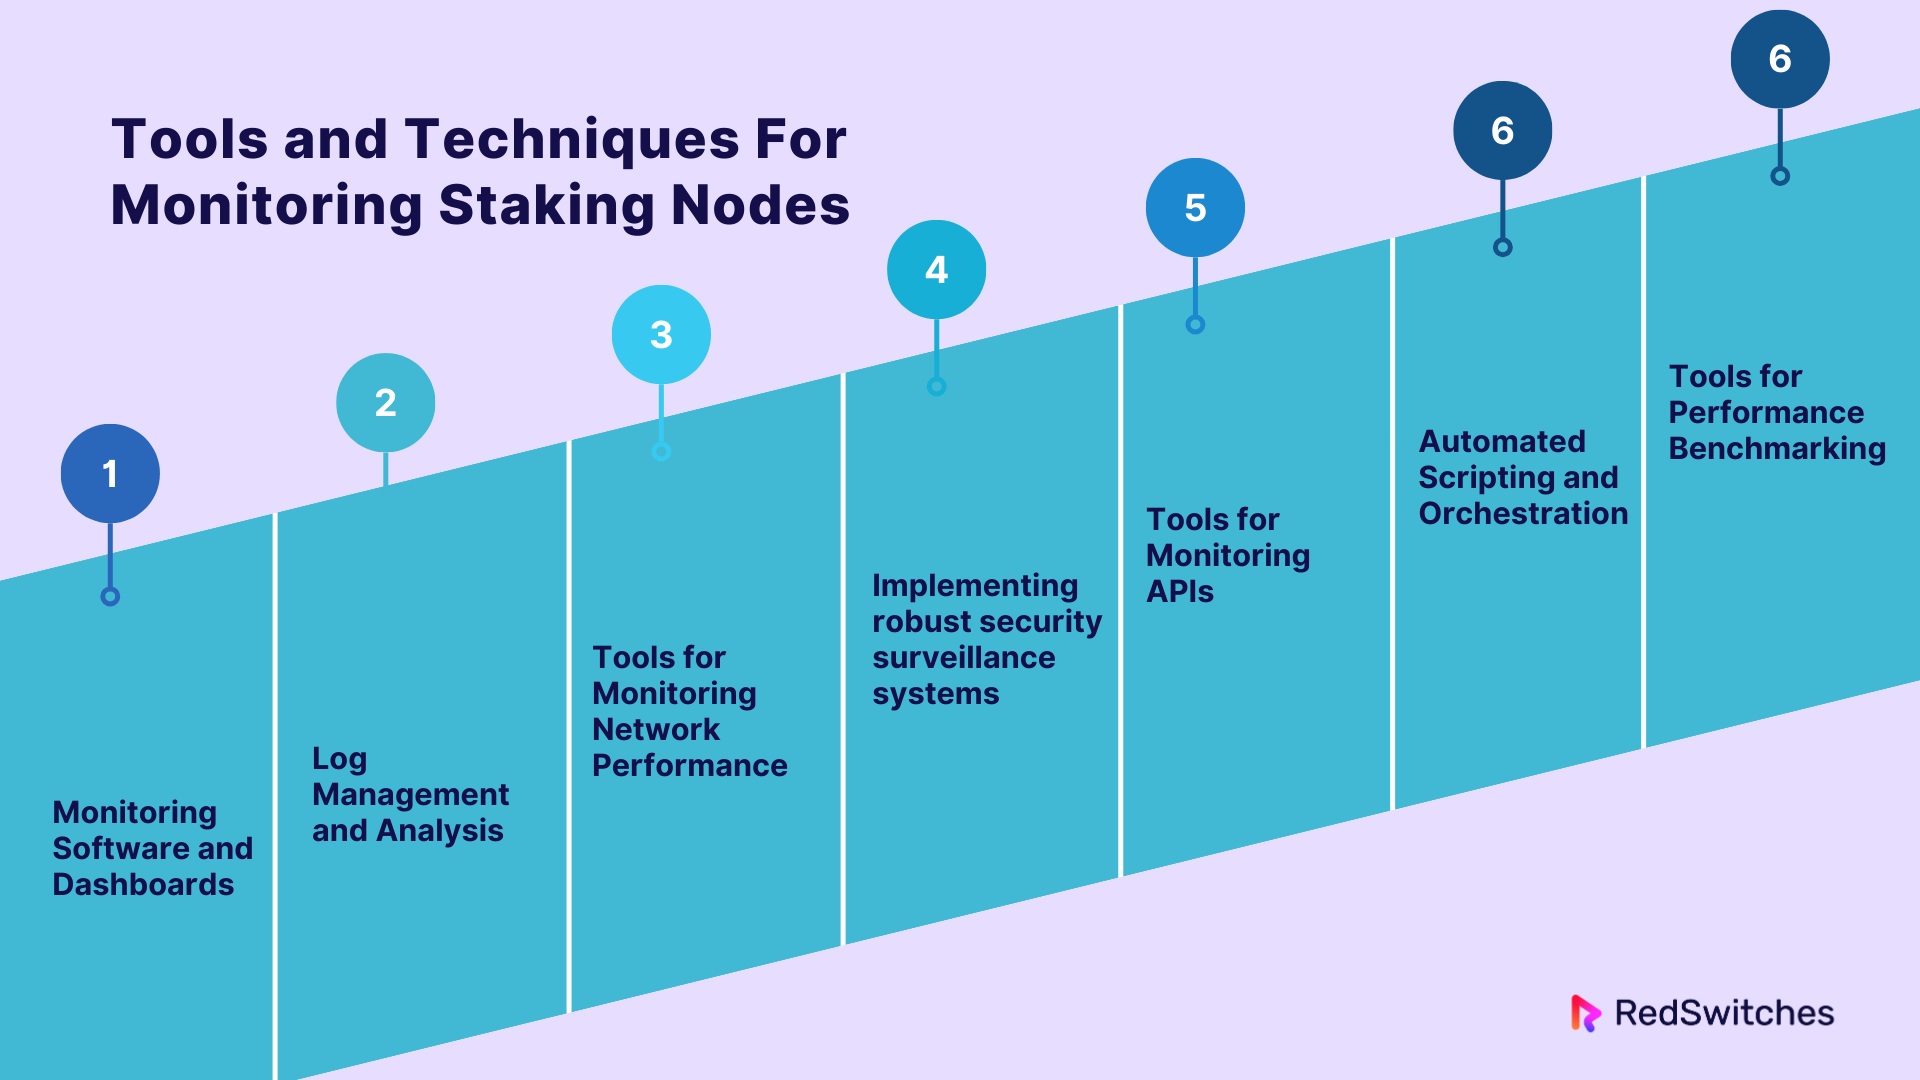 Tools and Techniques For Monitoring Staking Nodes